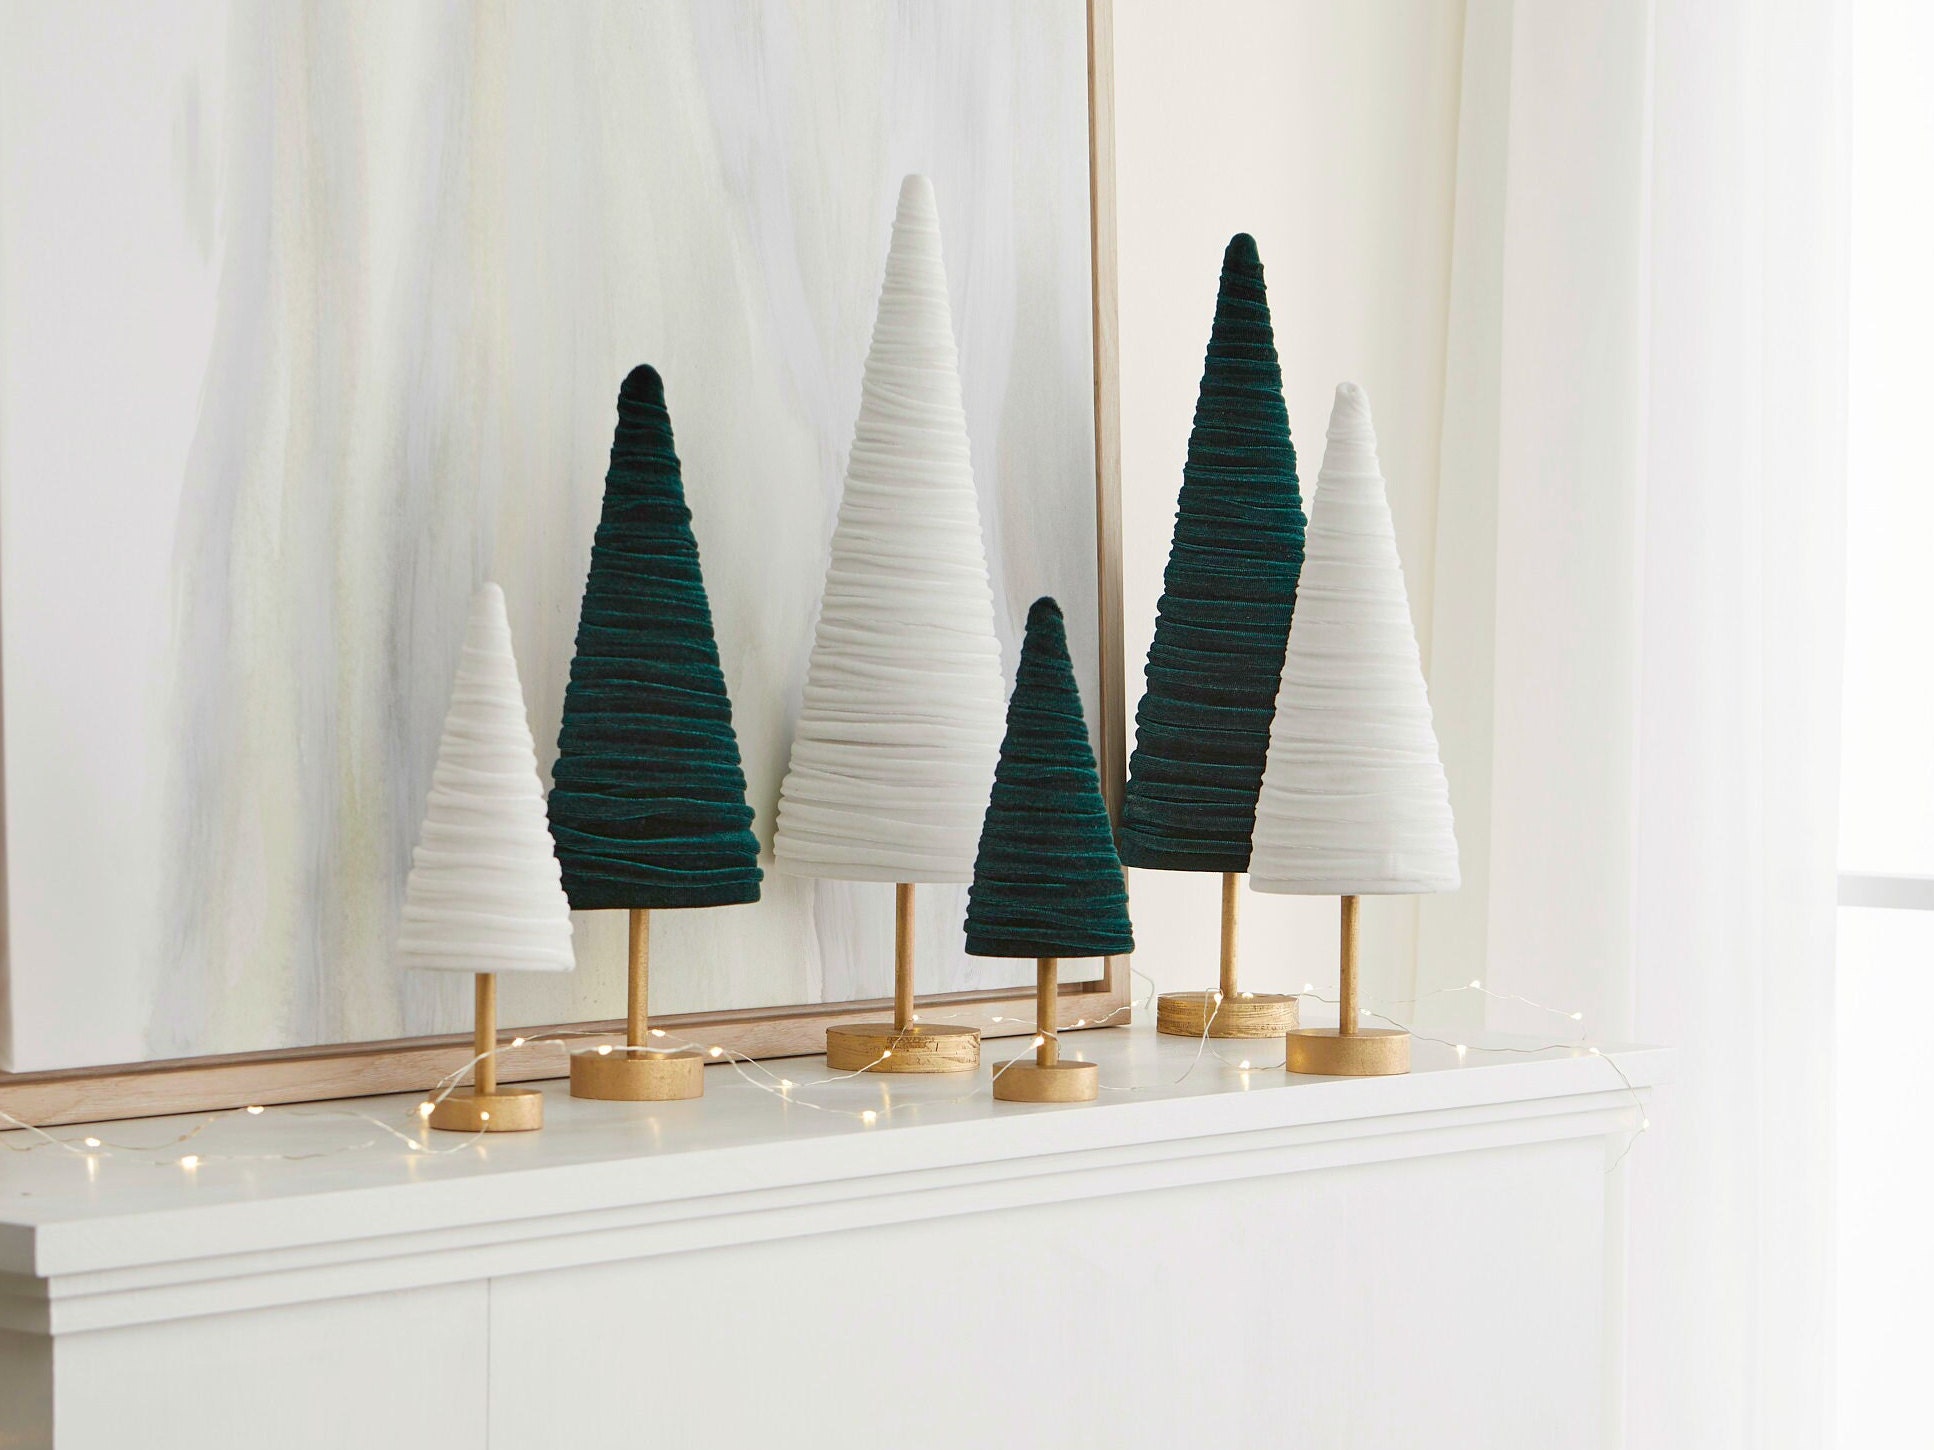  Christmas Pedestal Velvet Trees Set of 3 Modern Winter Tree  Decorations 3 Sizes Christmas Velvet Decorations Rustic Xmas Table Top  Centerpiece Decor for Home Entryway (Green) : Home & Kitchen